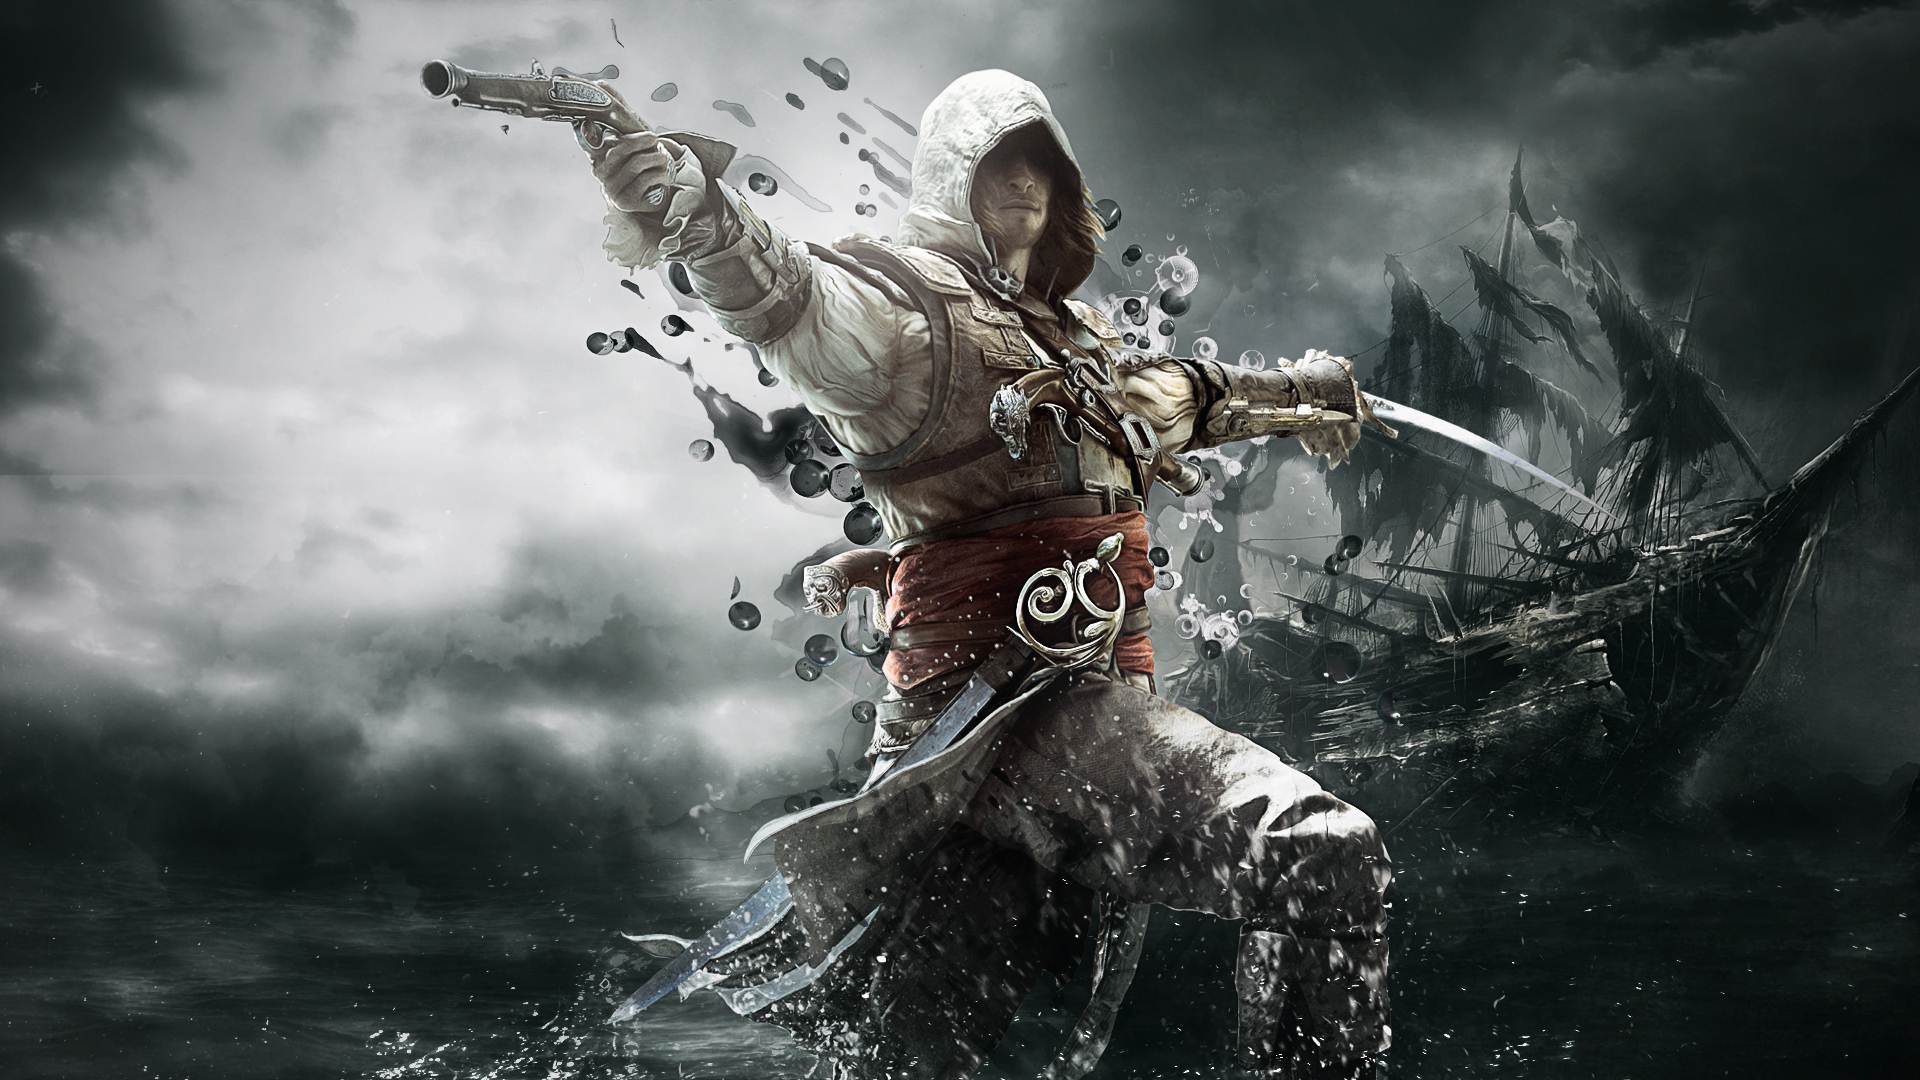 Assassins Creed Wallpaper HD 1080p Image Amp Pictures Becuo